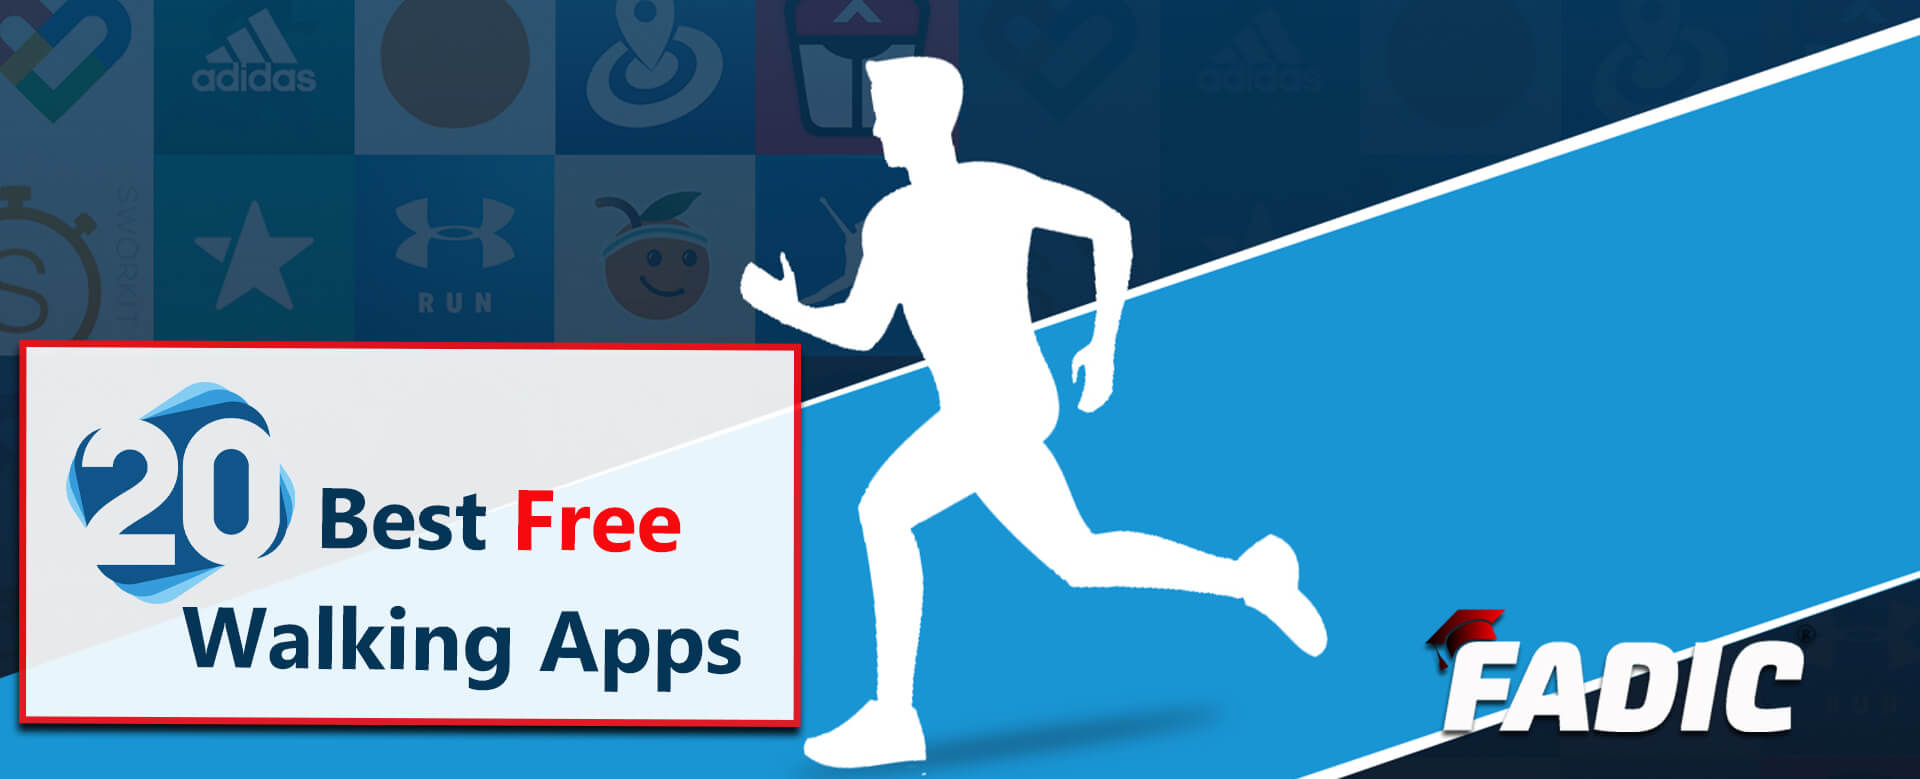 20-best-free-walking-apps-for-walkers-download-from-fadic